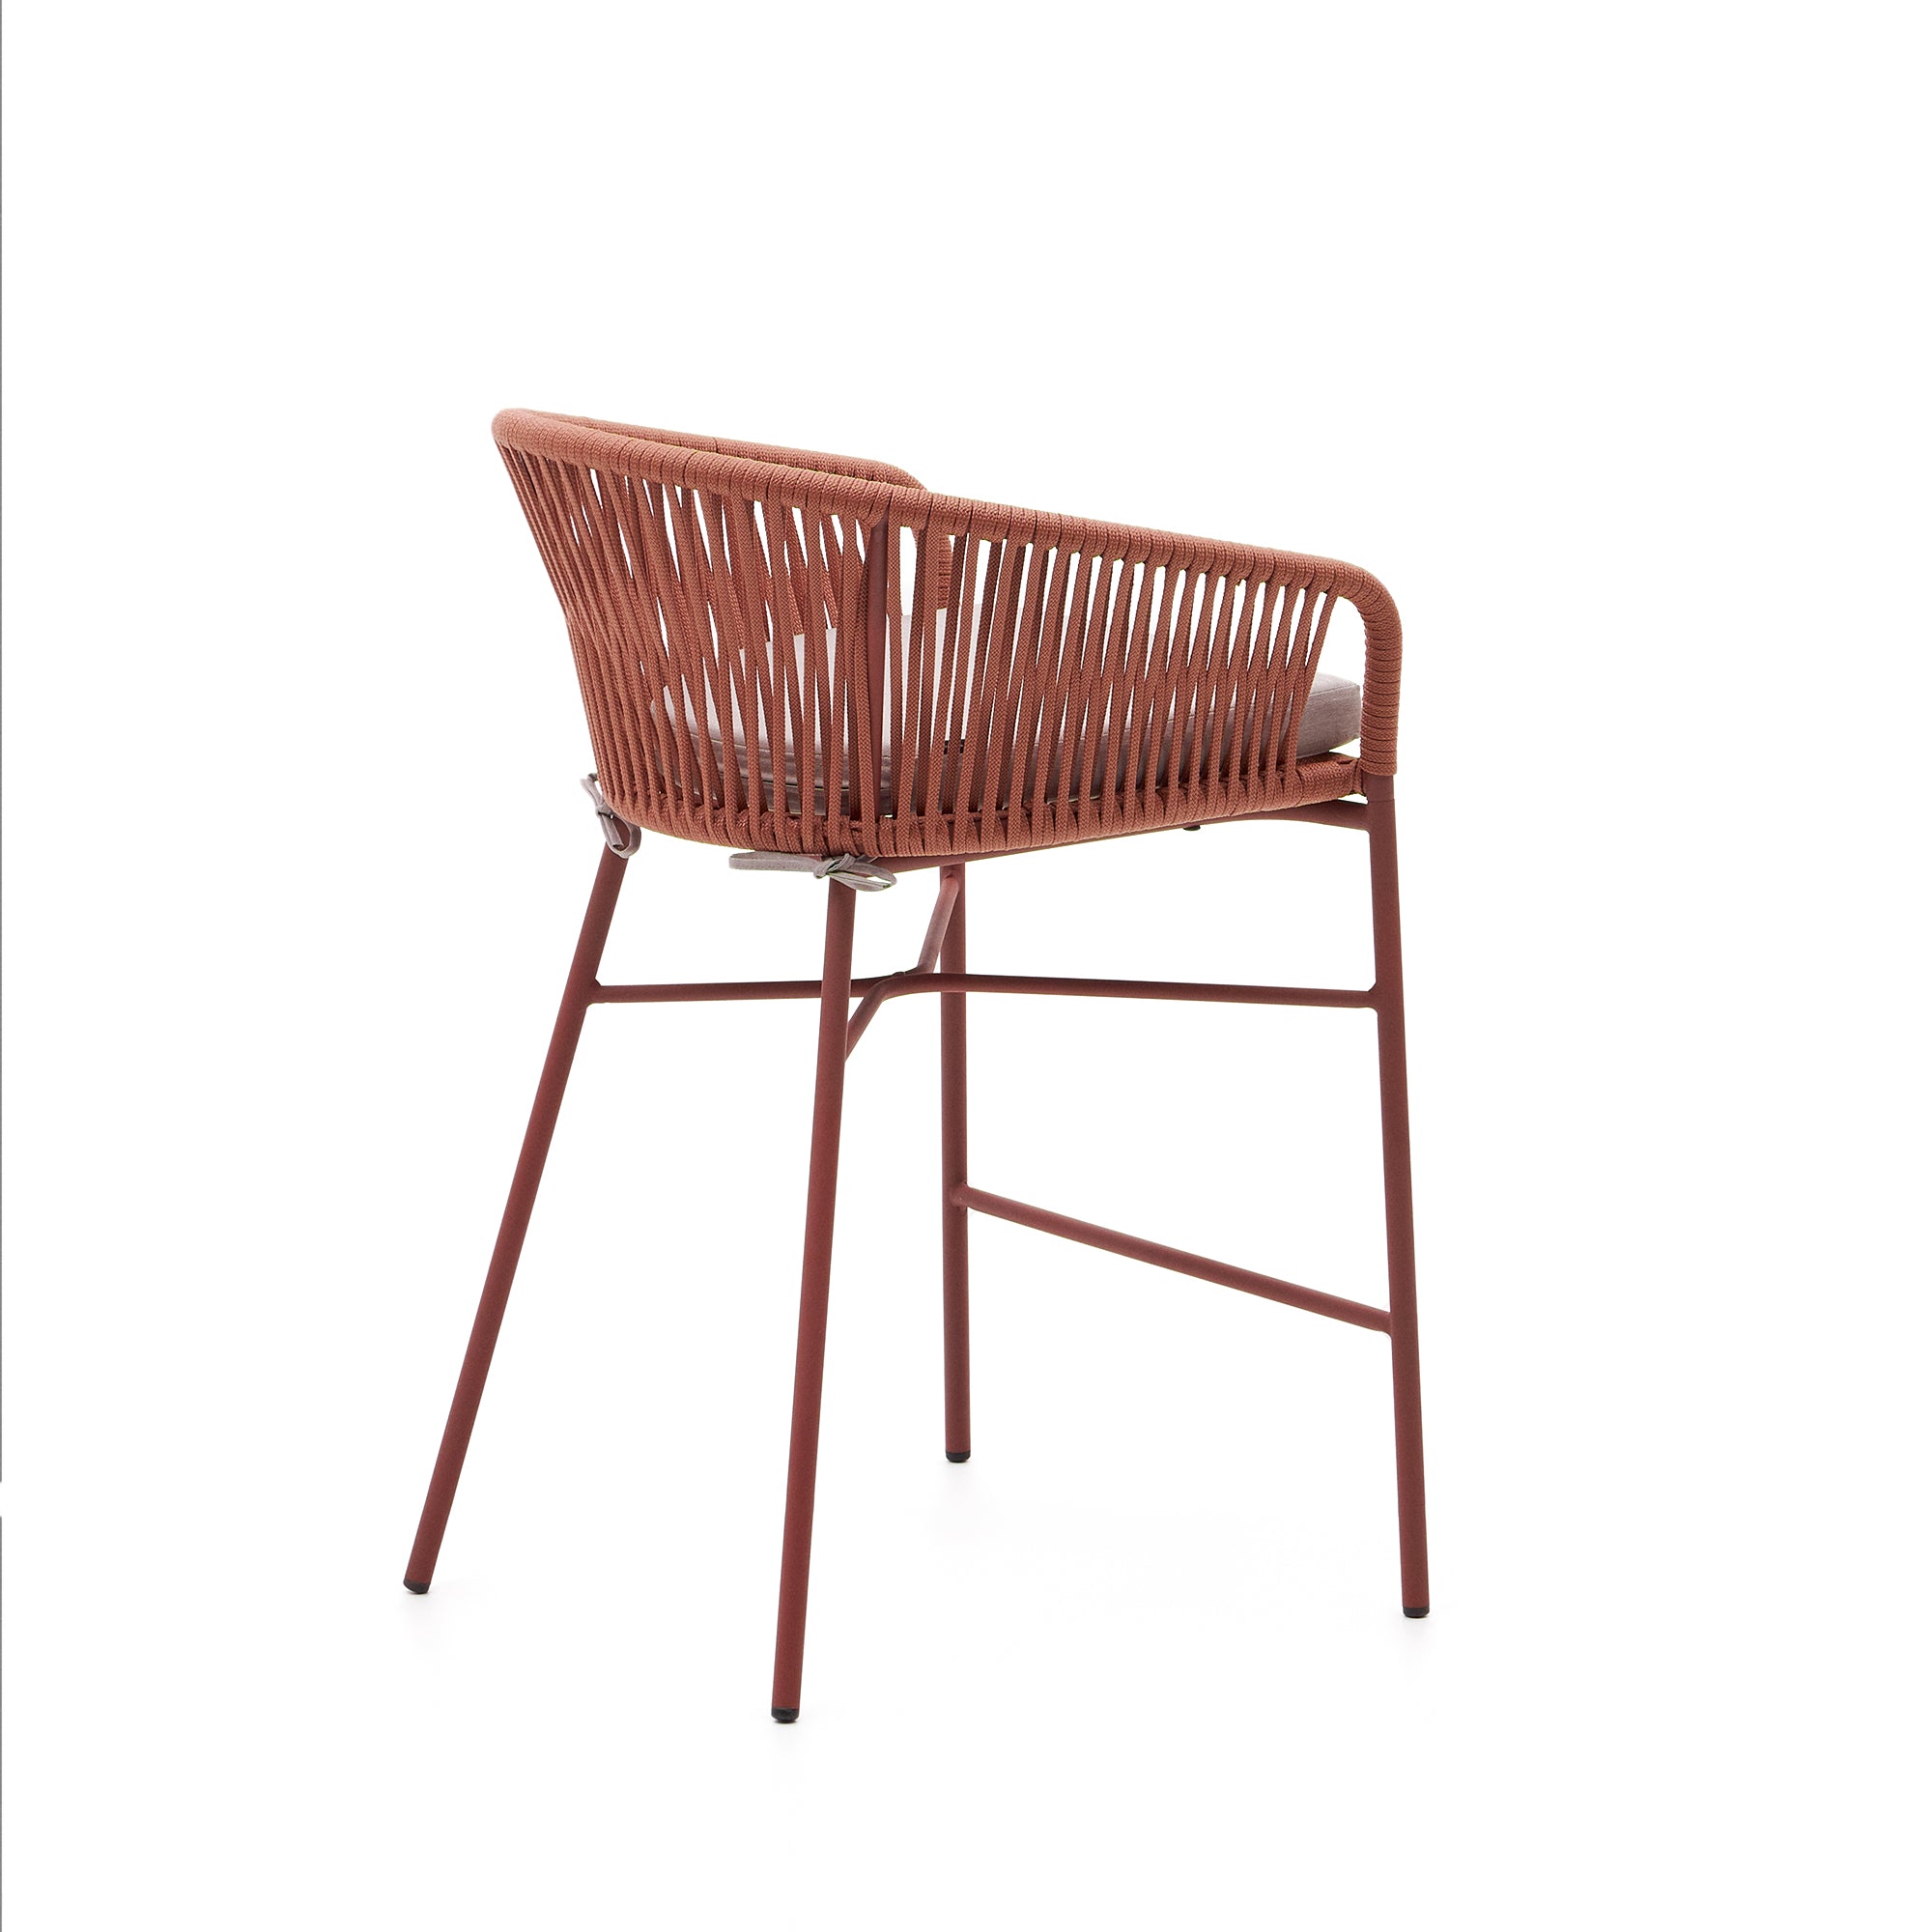 Yanet stackable stool made from terracotta cord and galvanised steel, height 65 cm